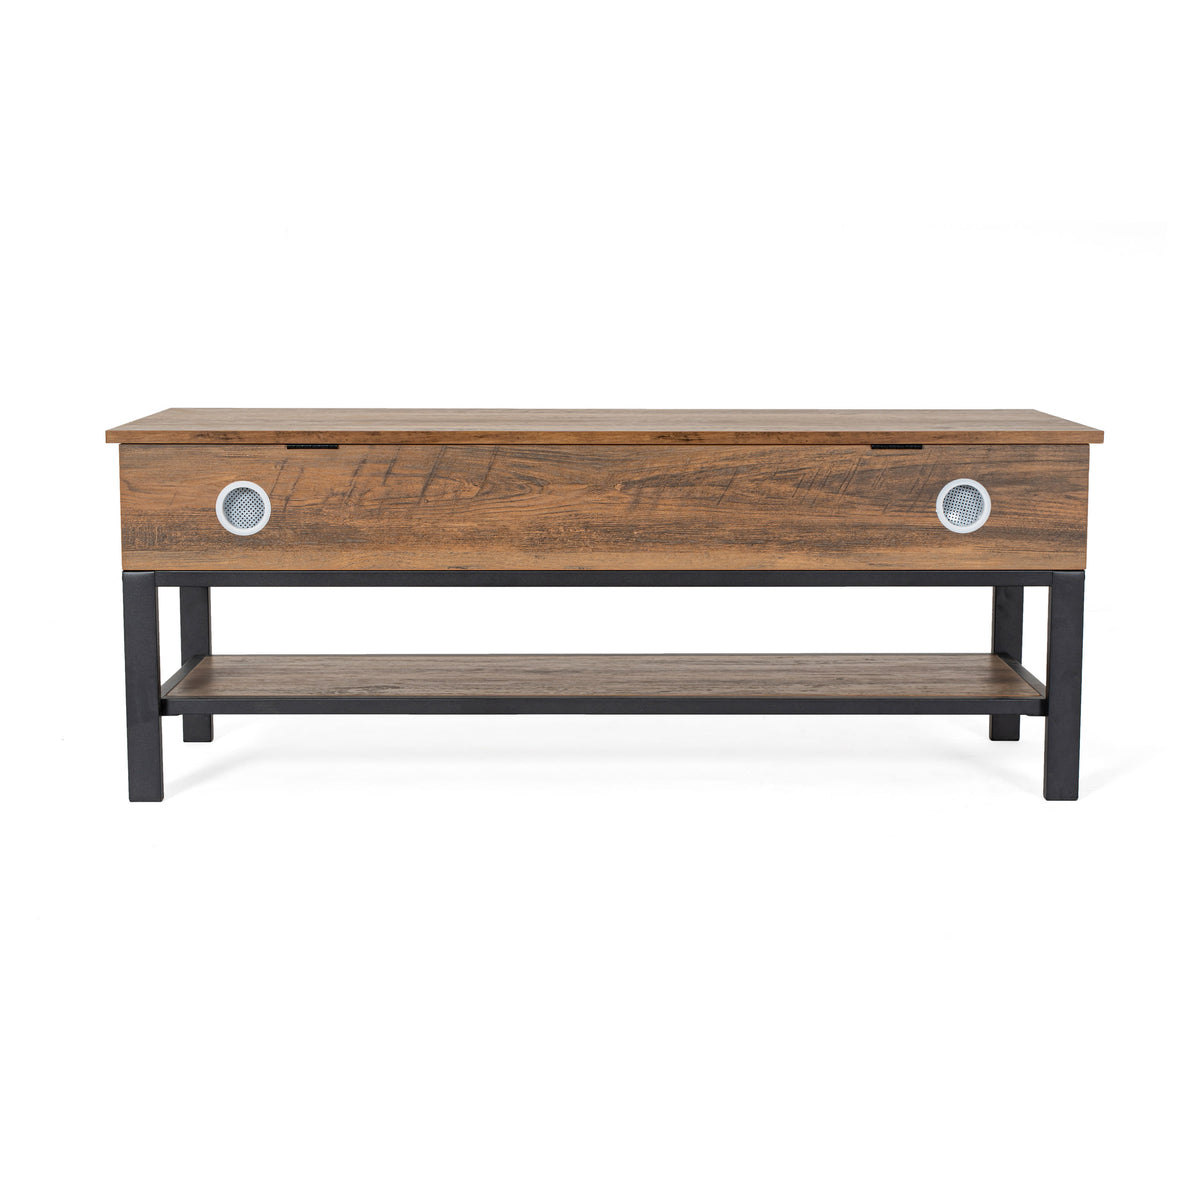 Rustic Oak |#| Farmhouse Entryway Bench with Hinged Lift Top and Storage in Rustic Oak